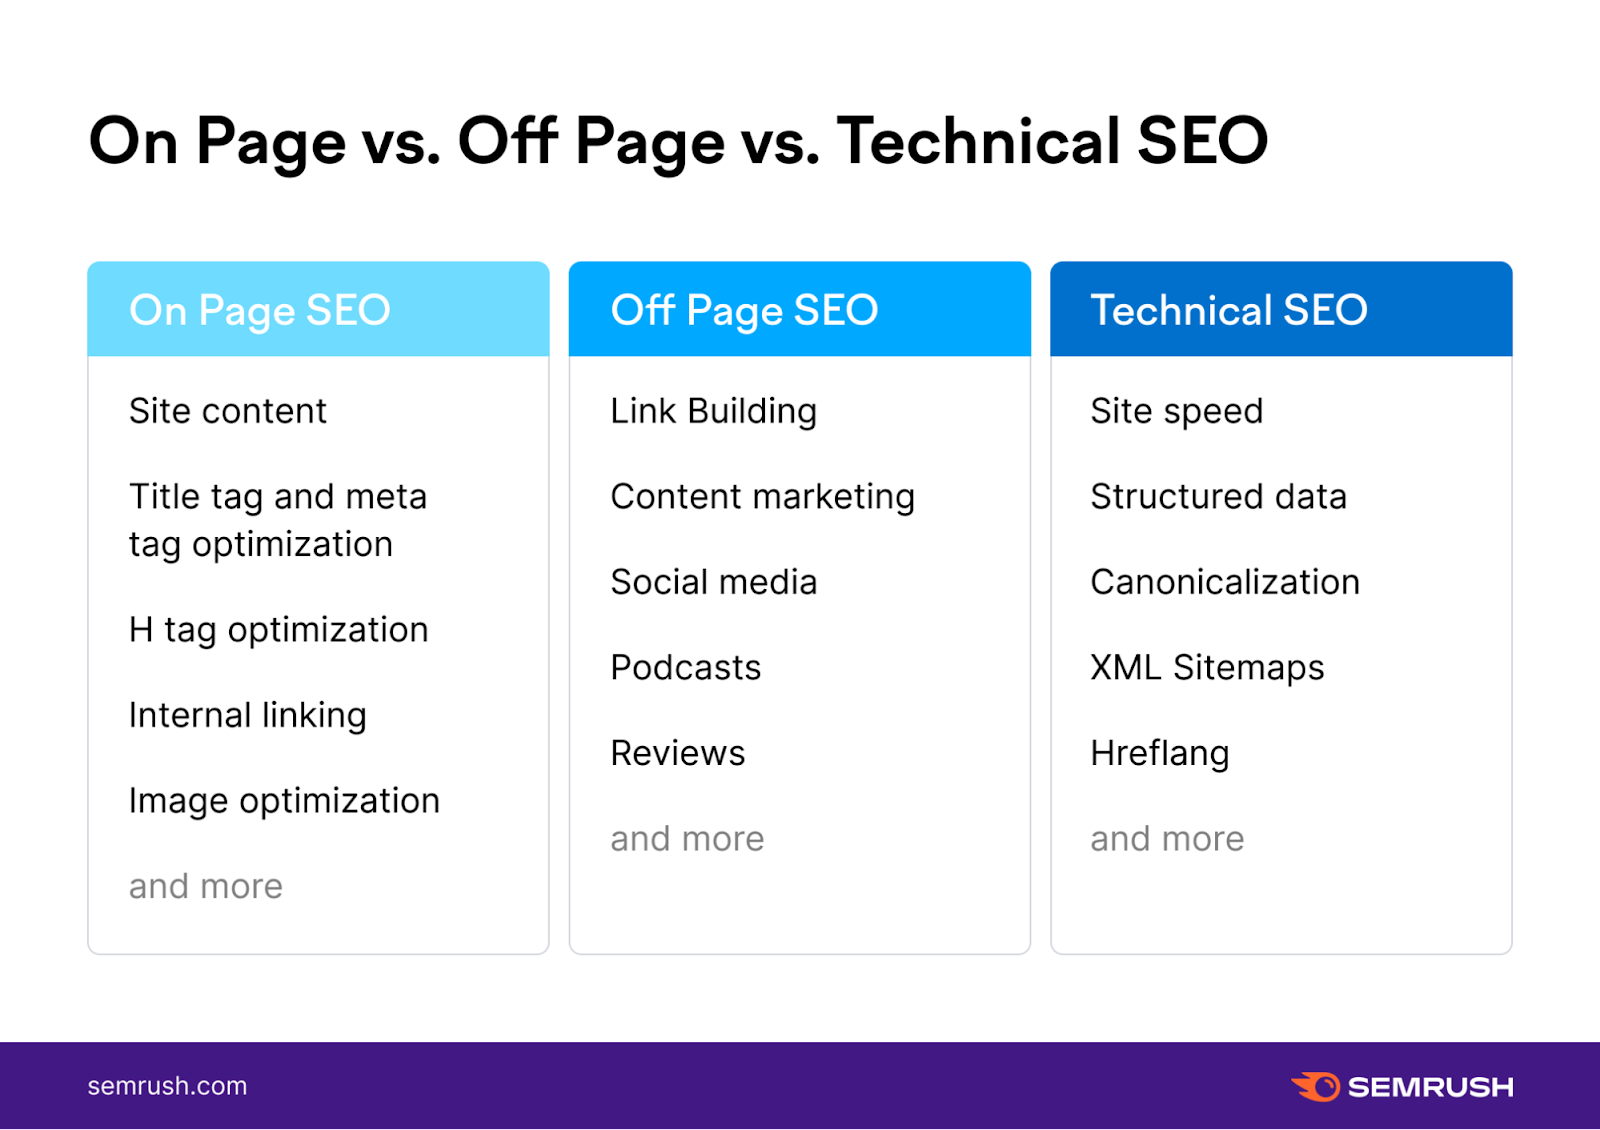 an infographic on "on page vs. off page vs. technical seo"